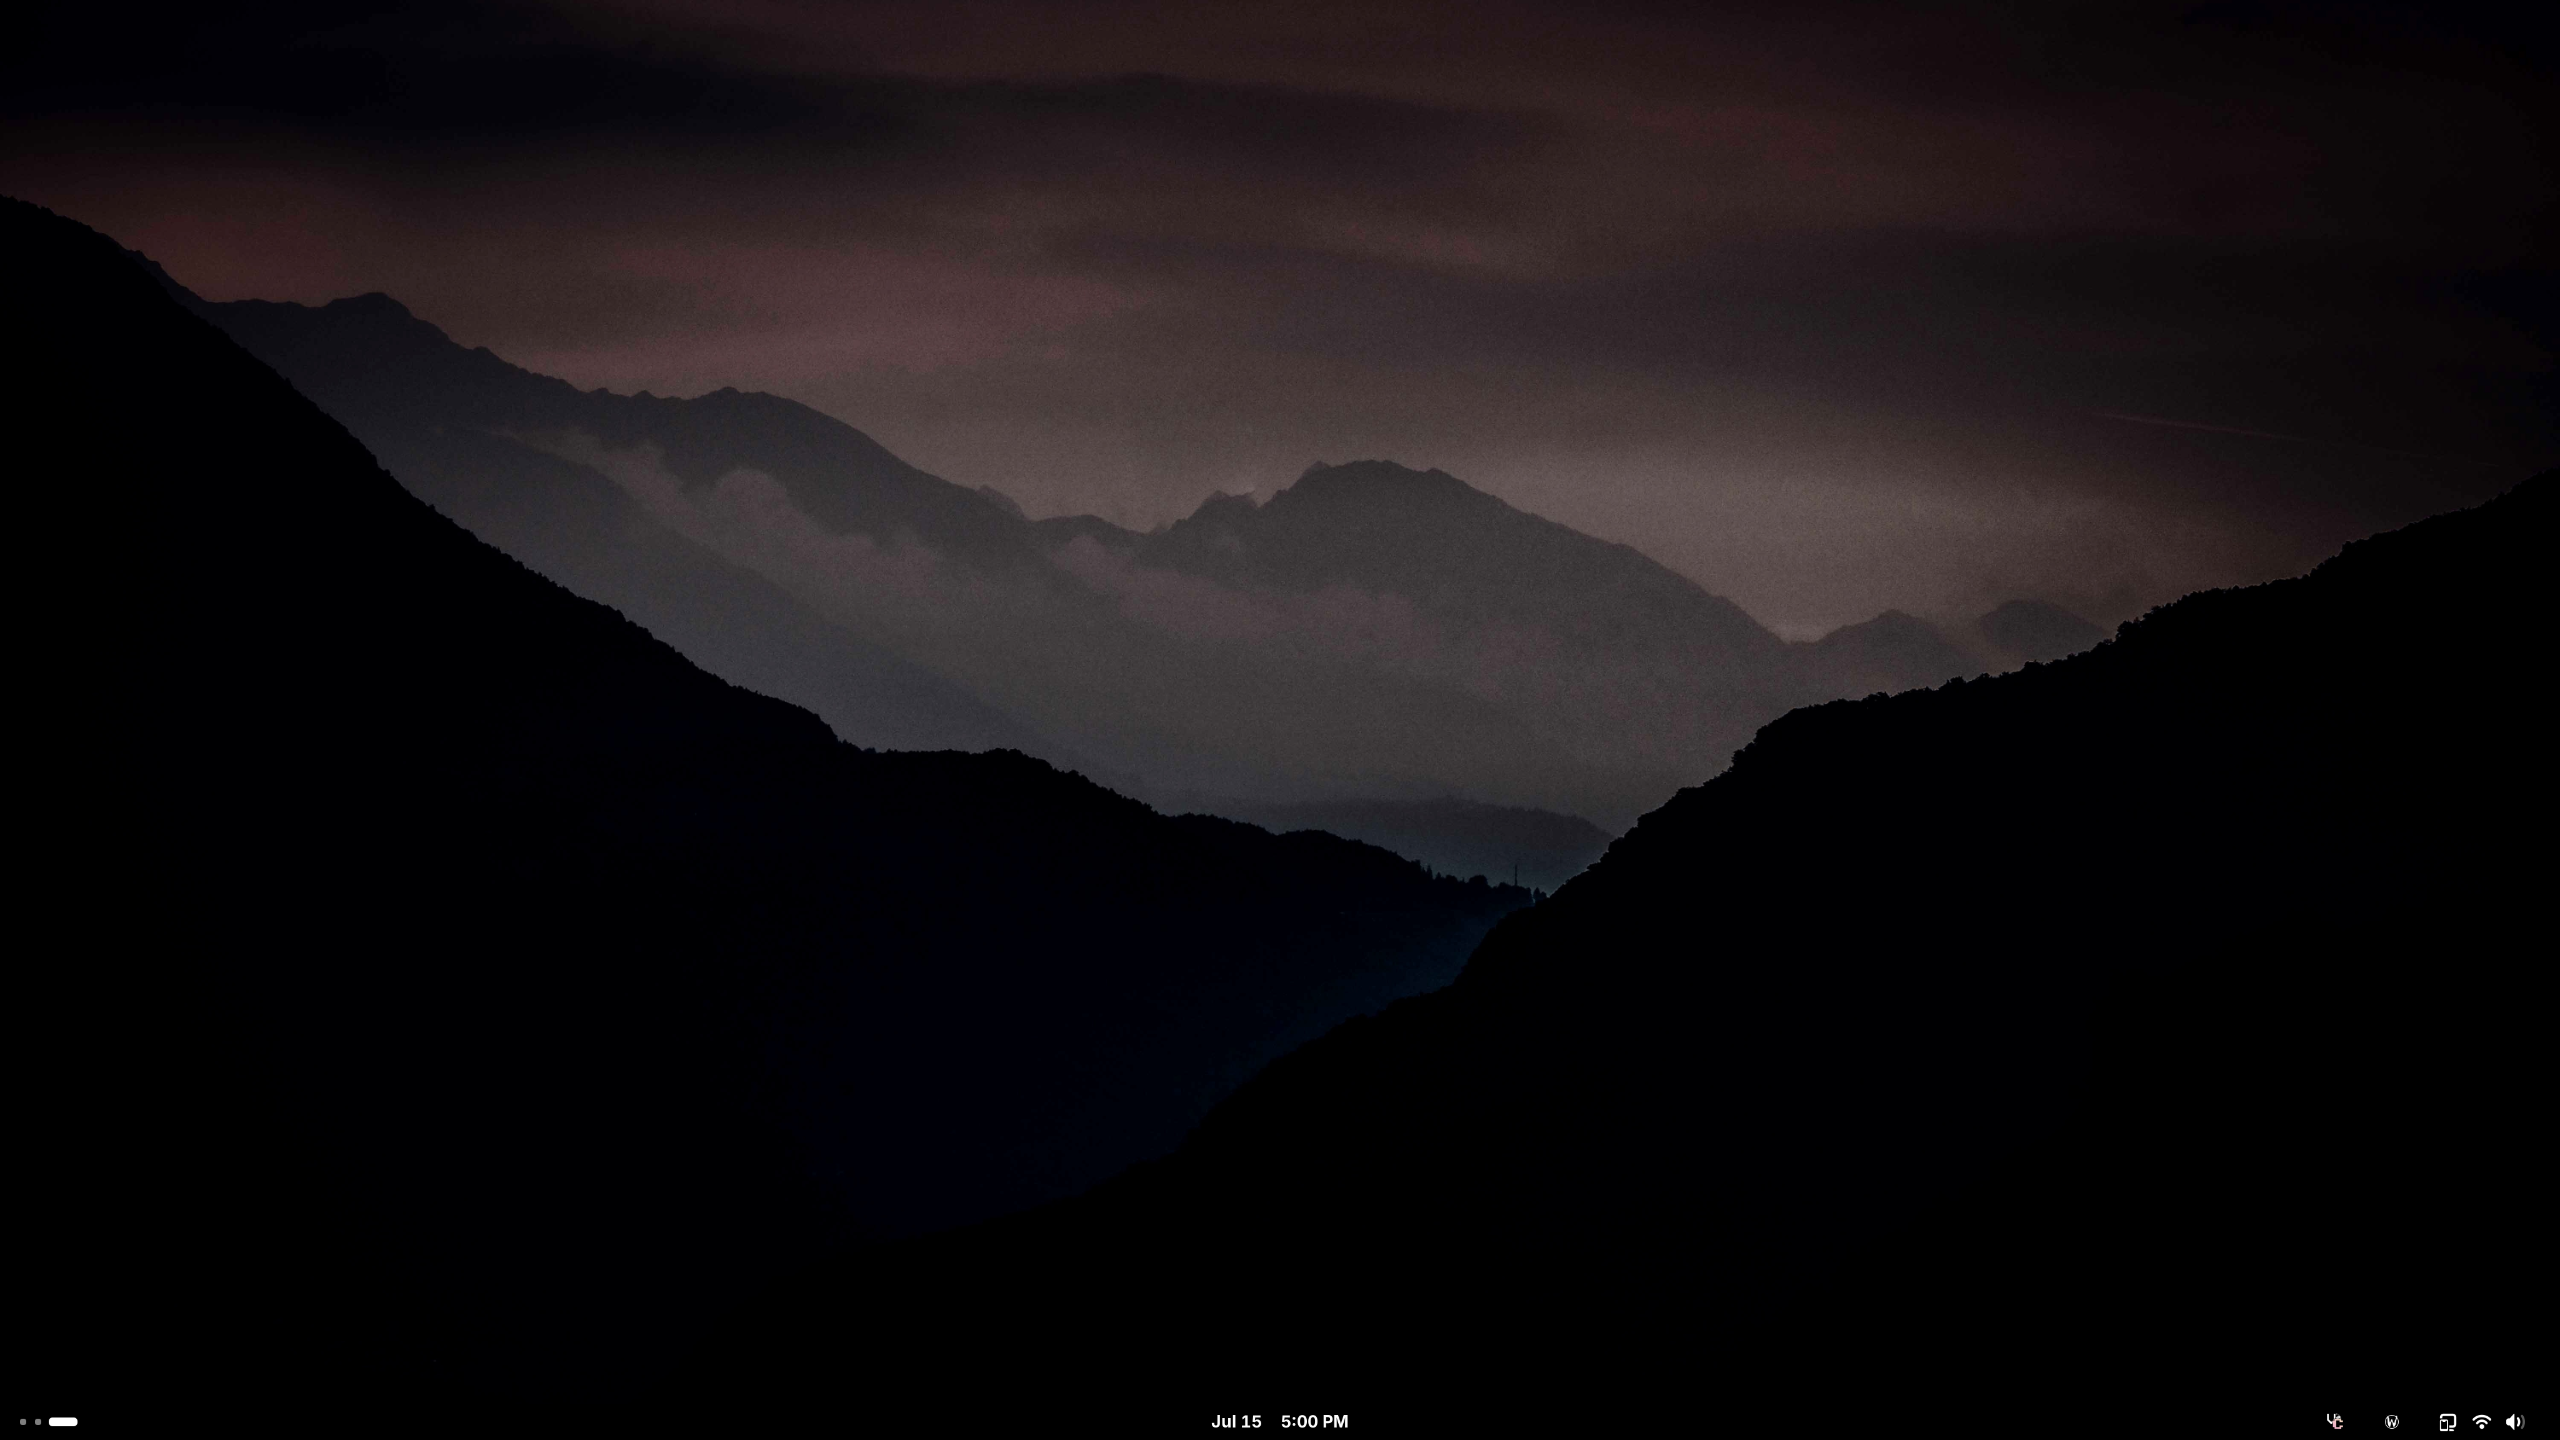 Fullscreen screenshot of a GNOME desktop. Wallpaper is Unsplash photo "silhouette of mountains during daytime" modified to make the foreground mountain pure black. JPEG artifacts are visible. GNOME's topbar has been moved to the bottom, made slightly smaller, font changed to Inter, and has the power icon removed with an X11 icon added to the right.